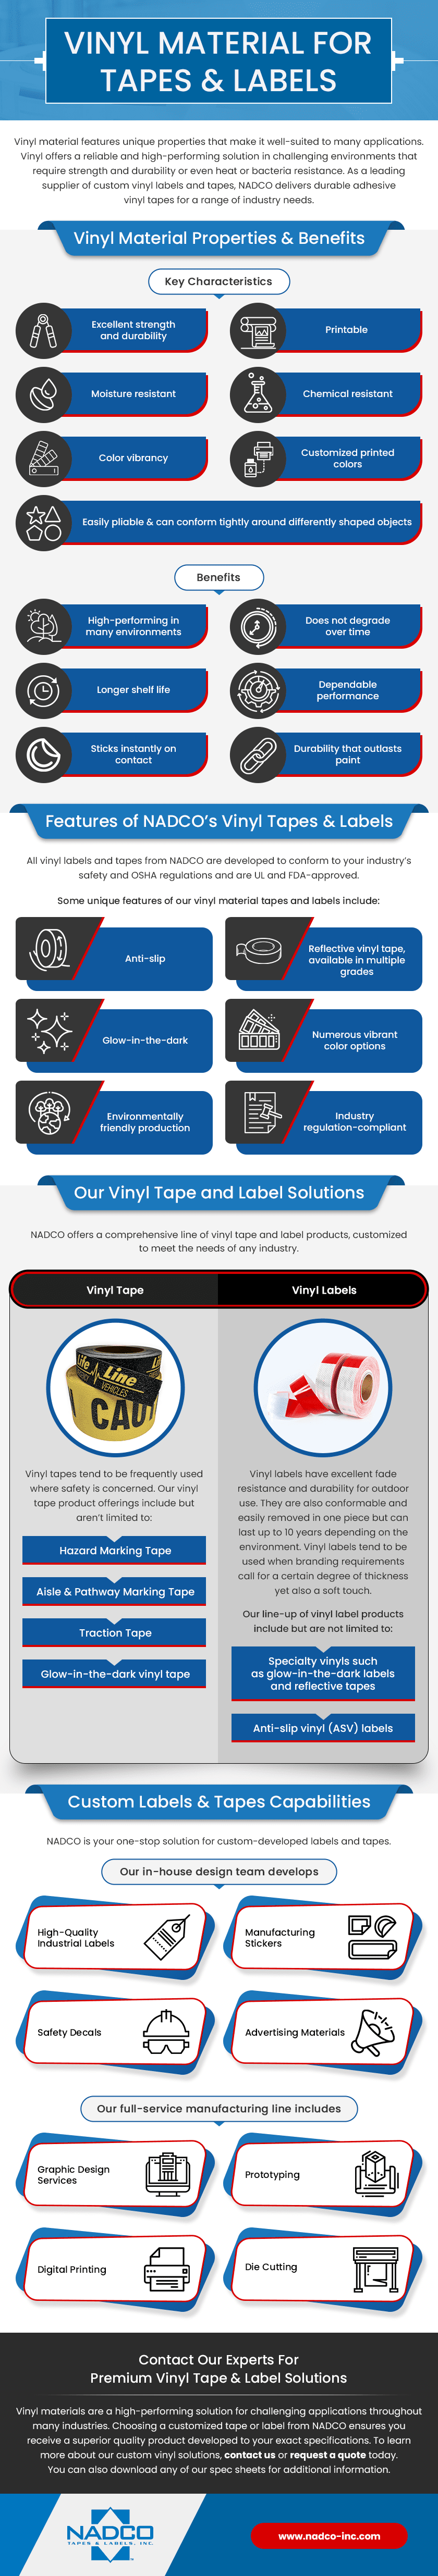 Vinyl material for tapes and labels infographic